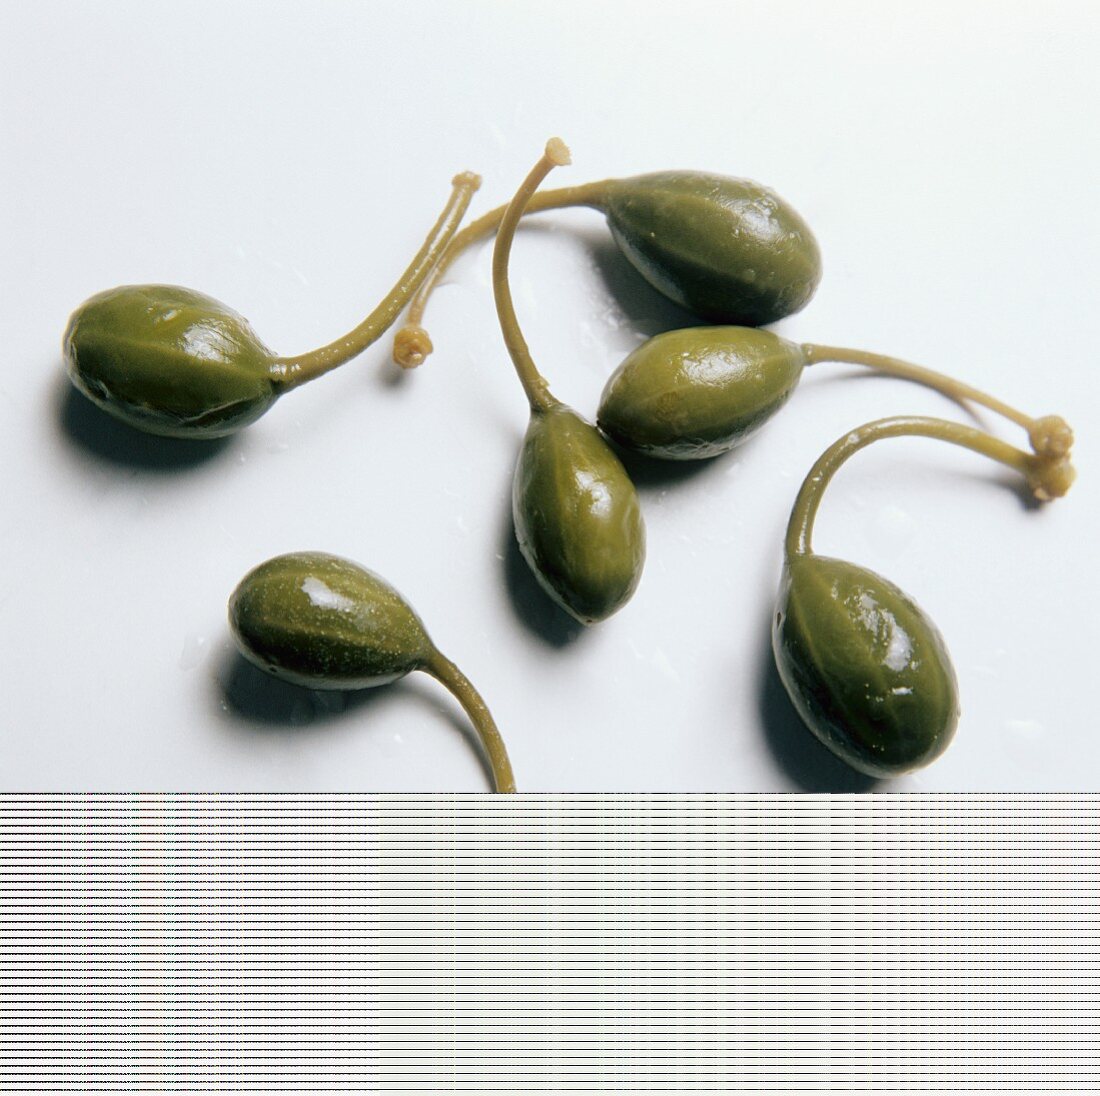 Six giant capers